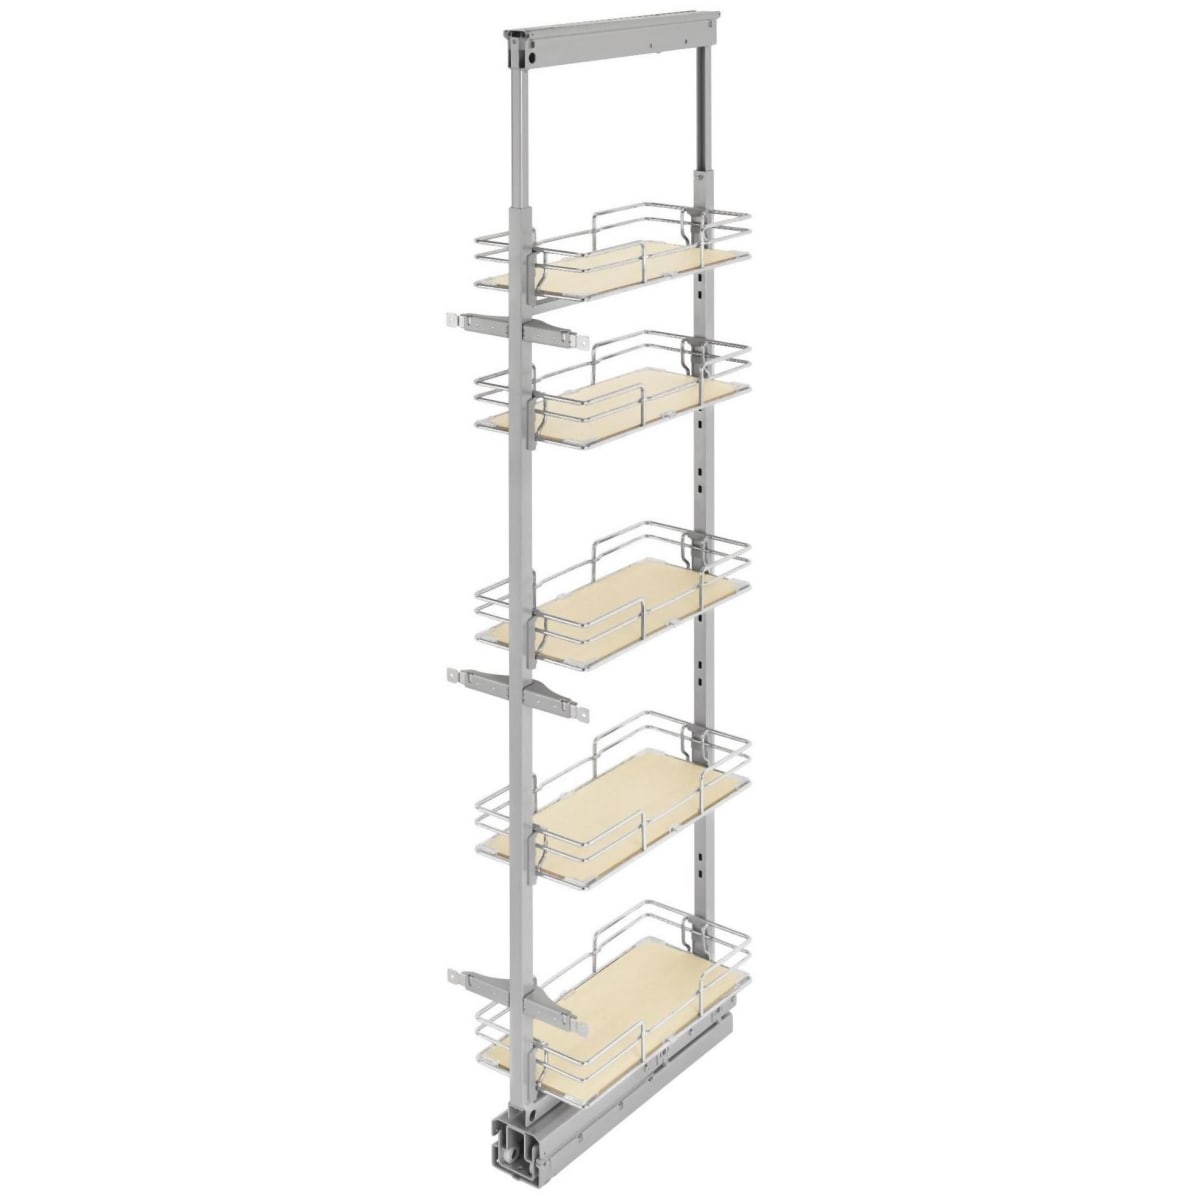  Rev-A-Shelf Adjustable Solid Surface System for Tall Pantry  Cabinets, Standard, Natural Maple : Home & Kitchen